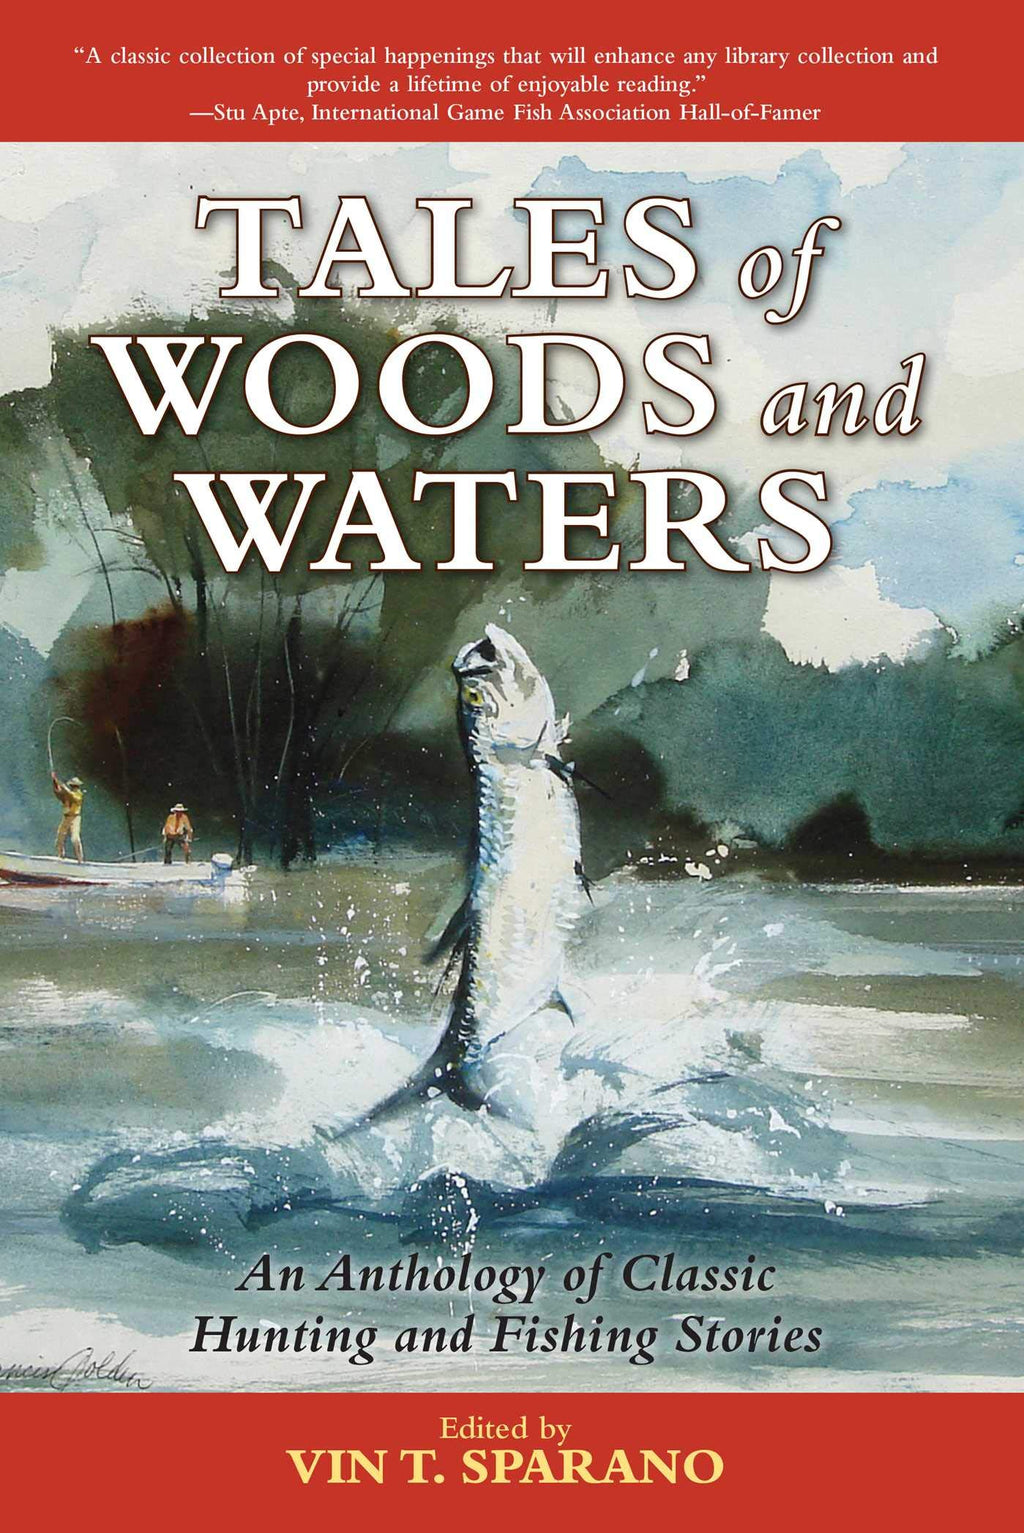 Tales of Woods and Waters: An Anthology of Classic Hunting and